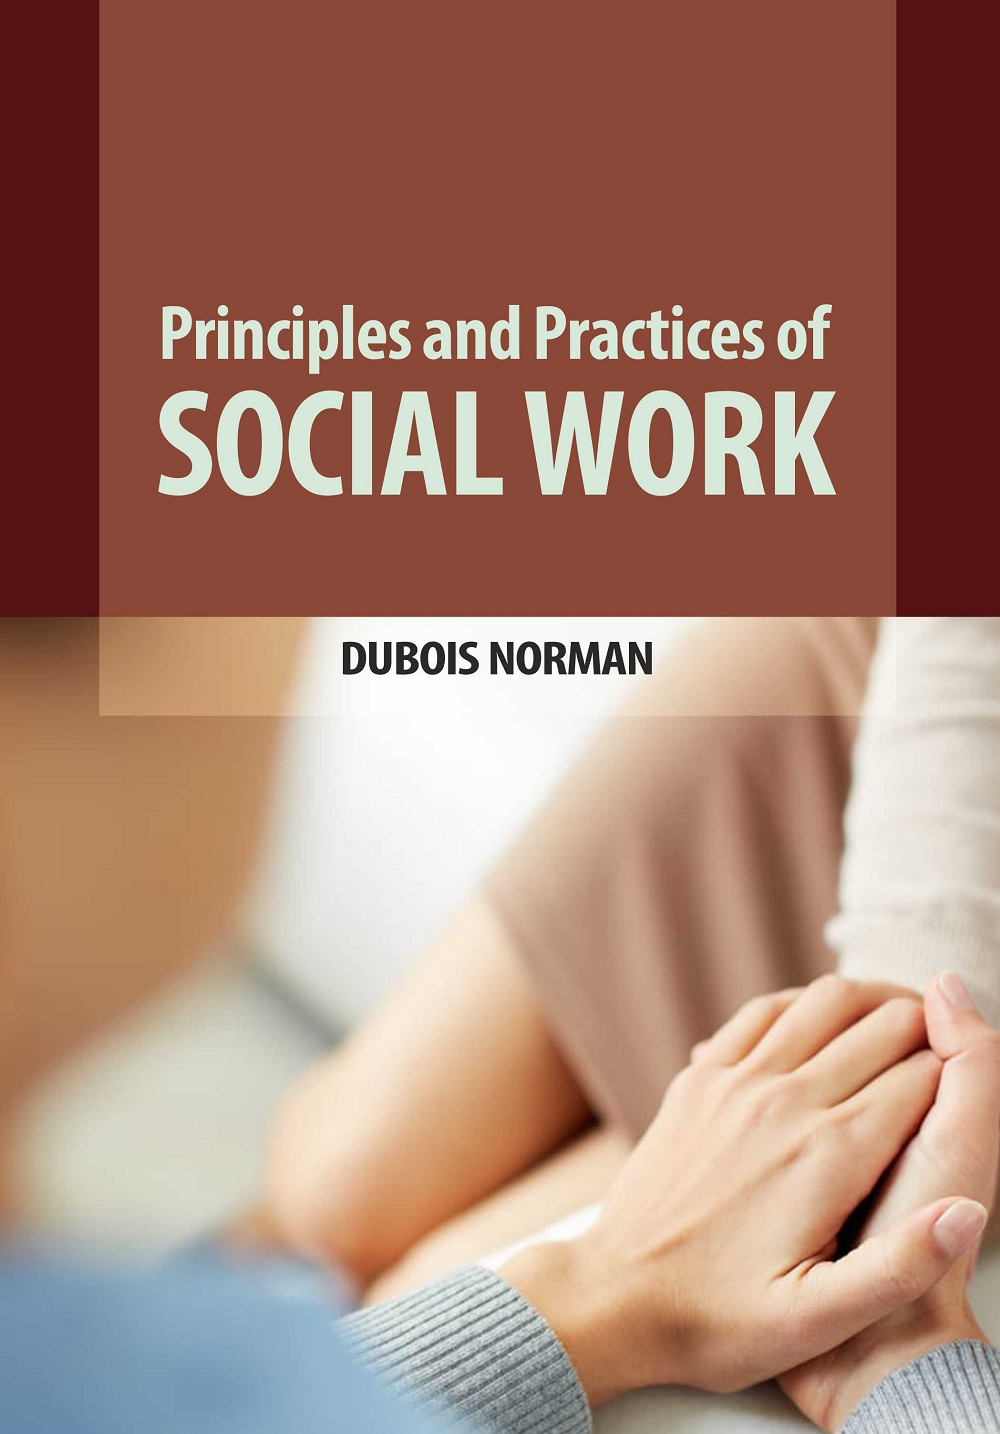 Principles and Practices of Social Work